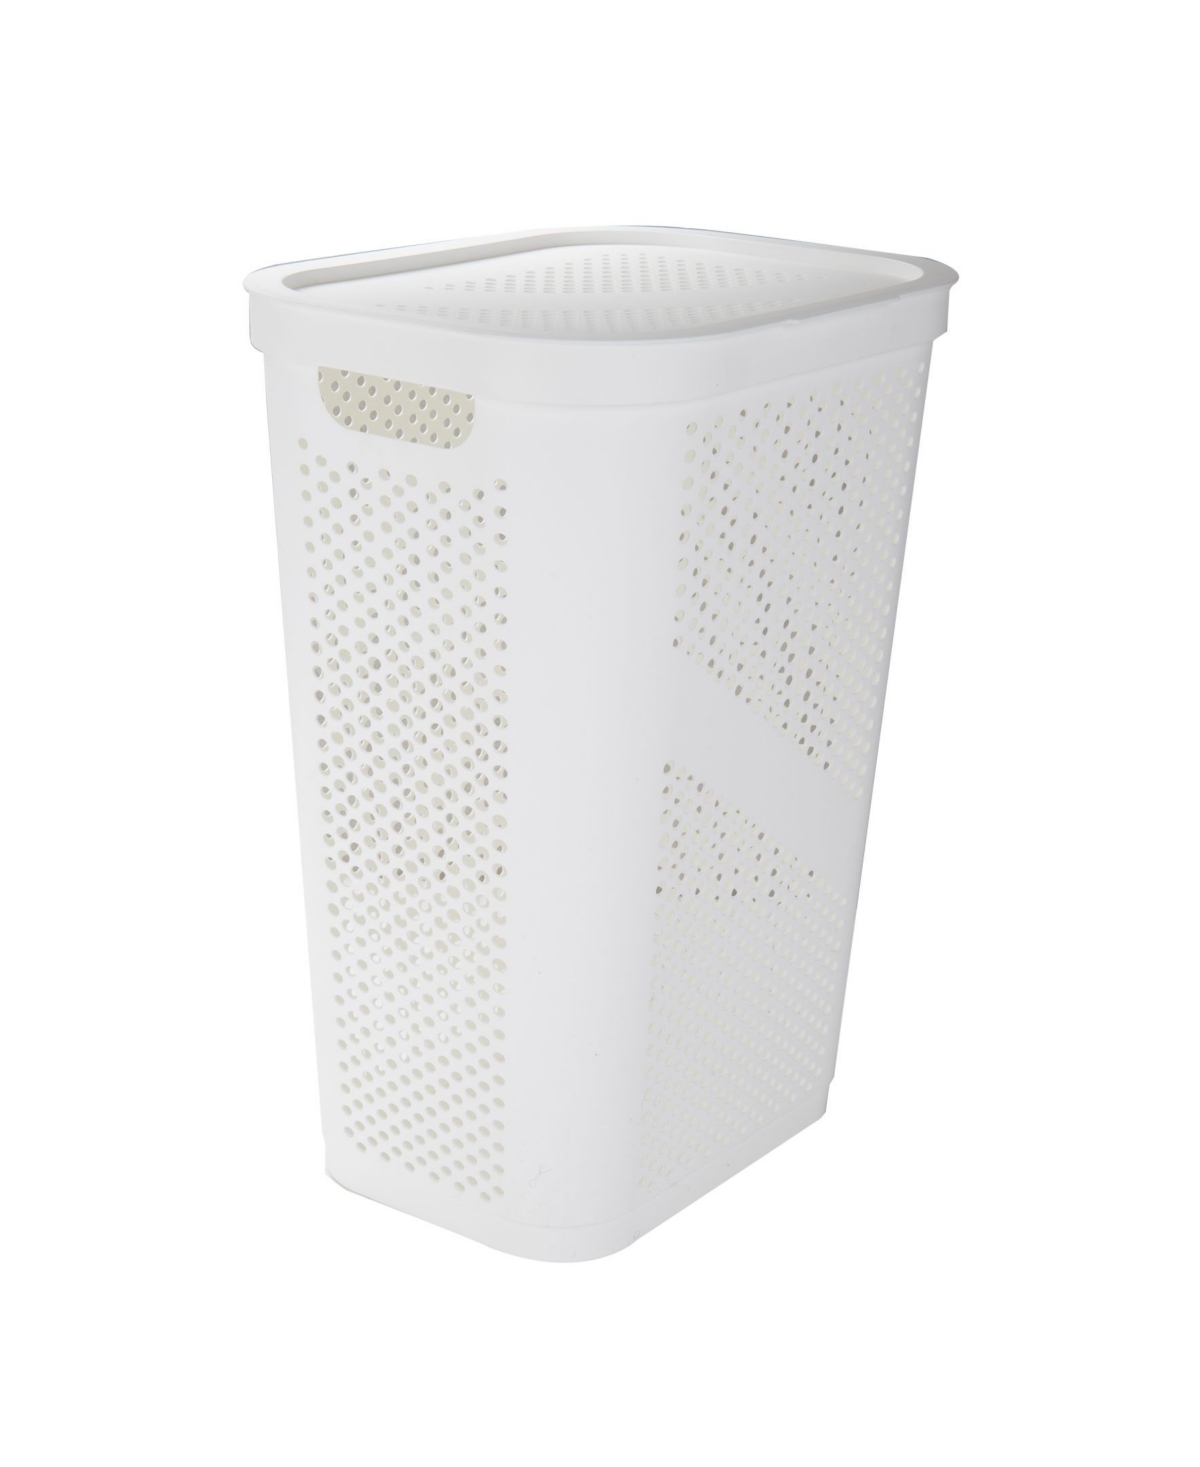 Mind Reader Perforated Lightweight Laundry Hamper With Lid In White